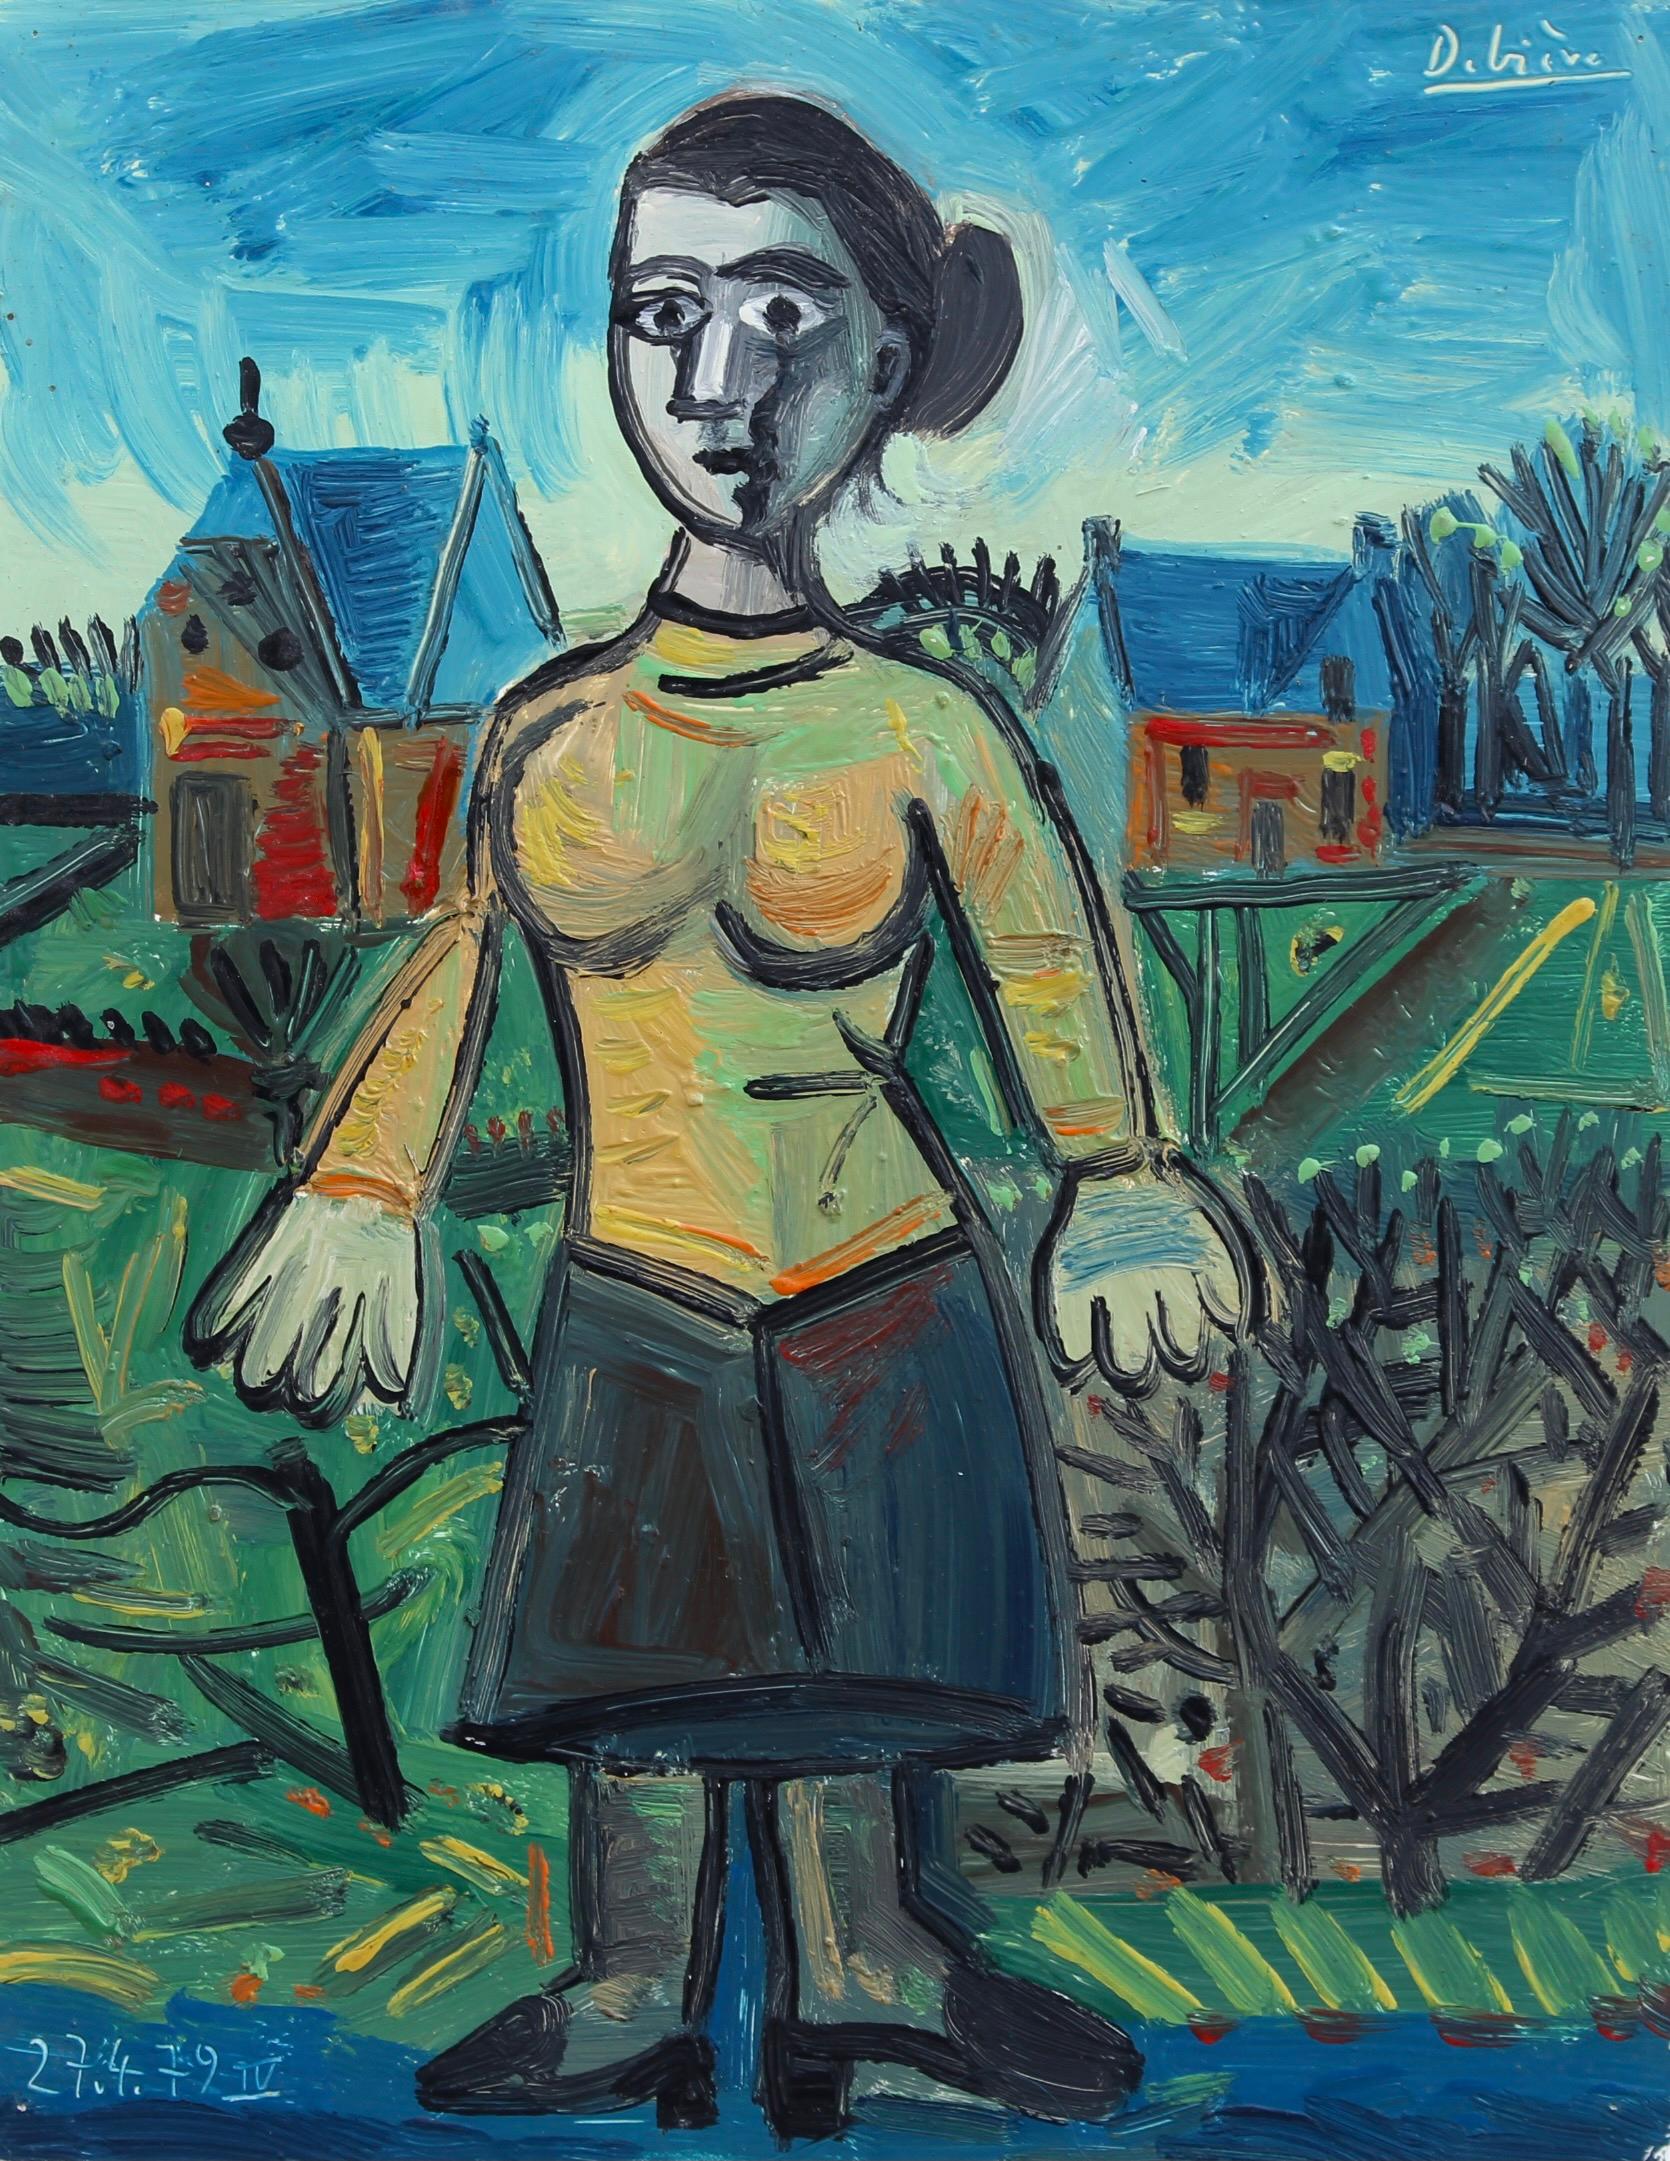 'Woman with Yellow Blouse', oil on cardstock paper (1979), by Raymond Debiève. Here the artist paints a woman posing in front of her home under a blue sky, in his post-cubist style. Beside her are shrubs and greenery from the yard nearby. Picasso's